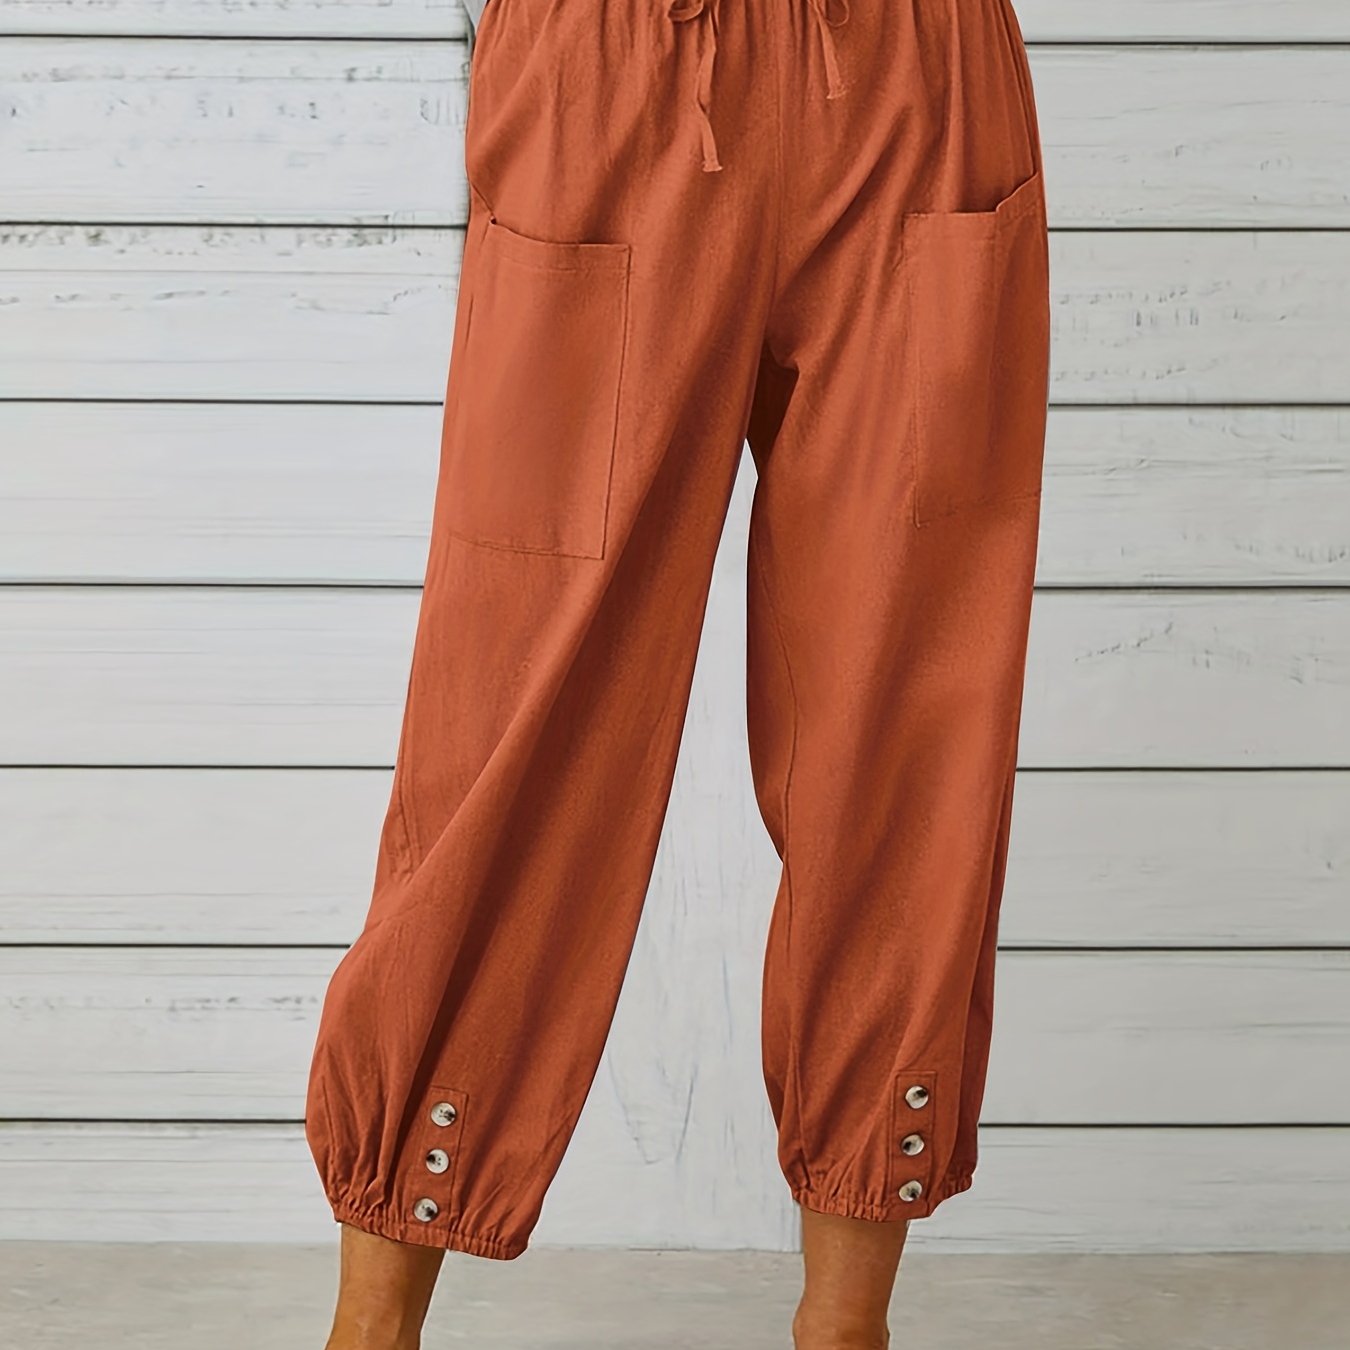 「binfenxie」Boho Baggy Harem Pants With Pockets, Drawstring Waist Casual Pants For Spring & Summer, Women's Clothing